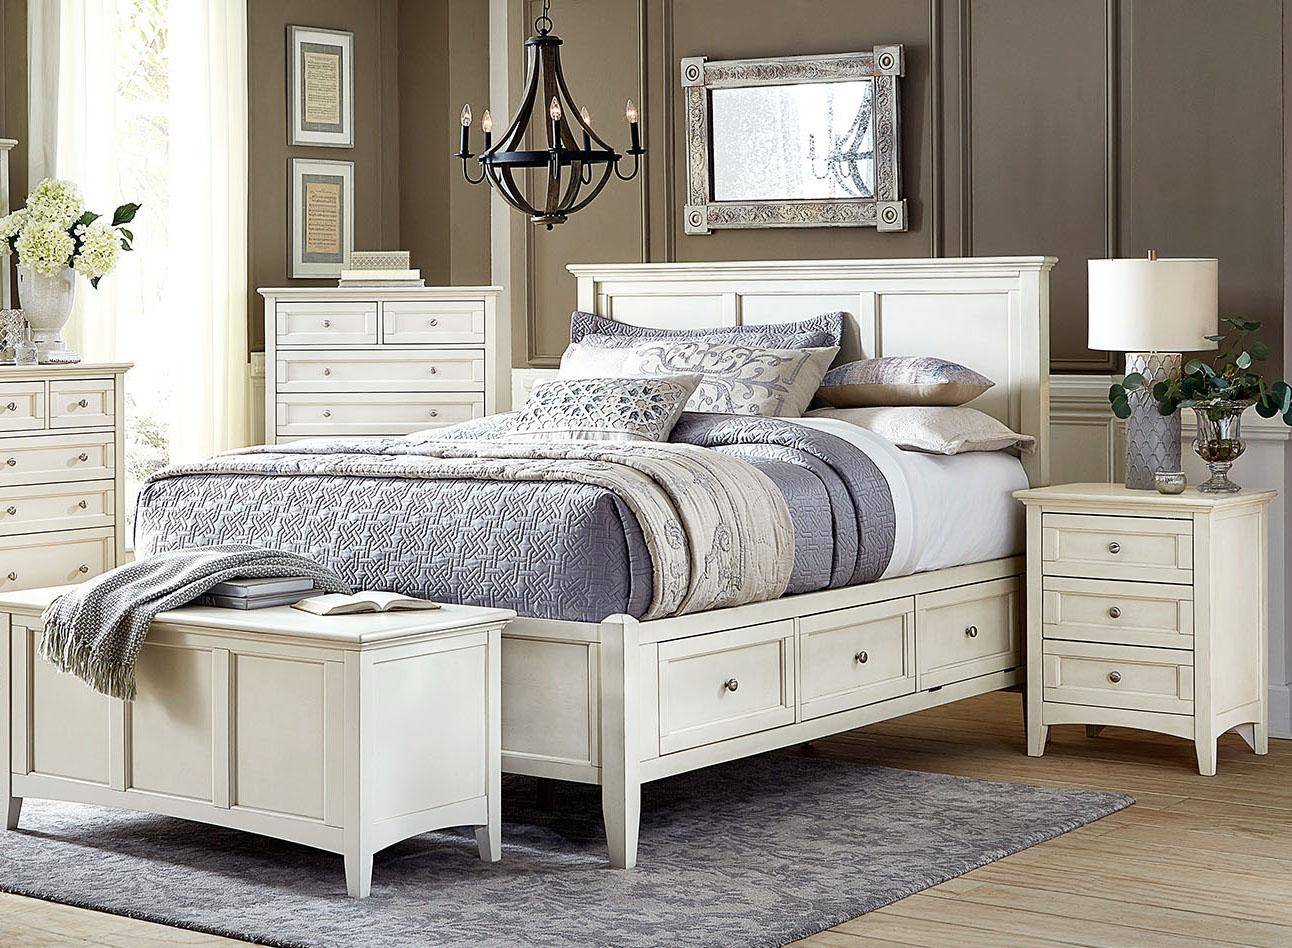 A America Northlake Queen Storage Bedroom Set 3 Pcs In White Wood